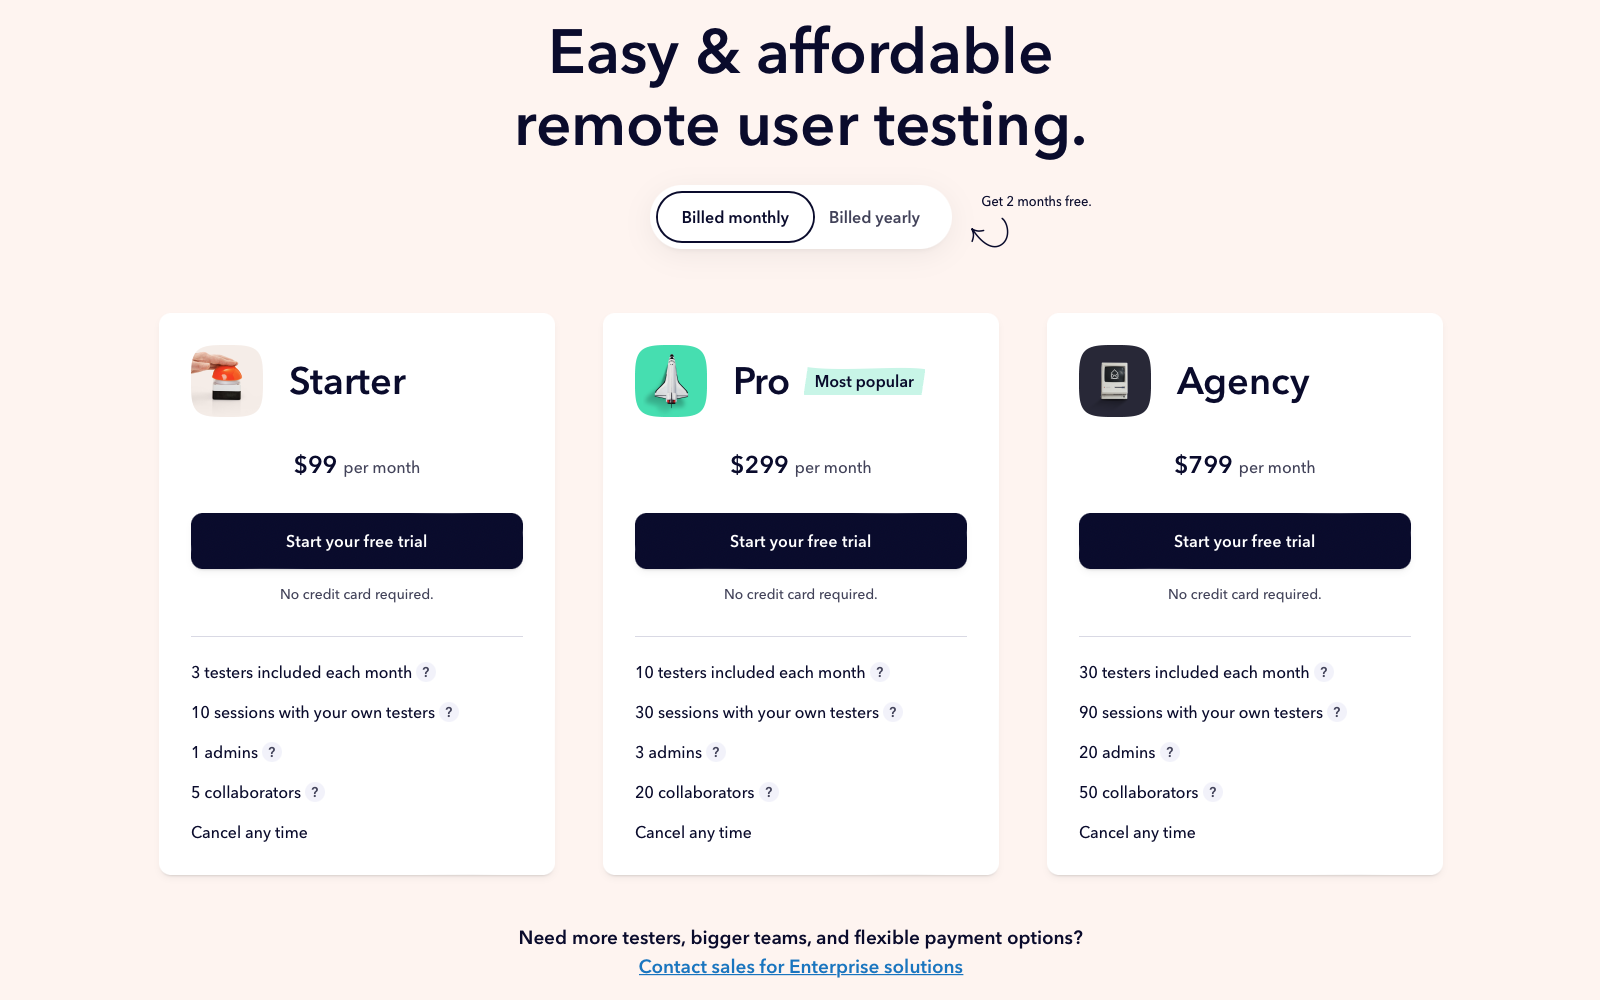 Userbrain Pricing: Starter, Pro, Agency, and Enterprise packages available.